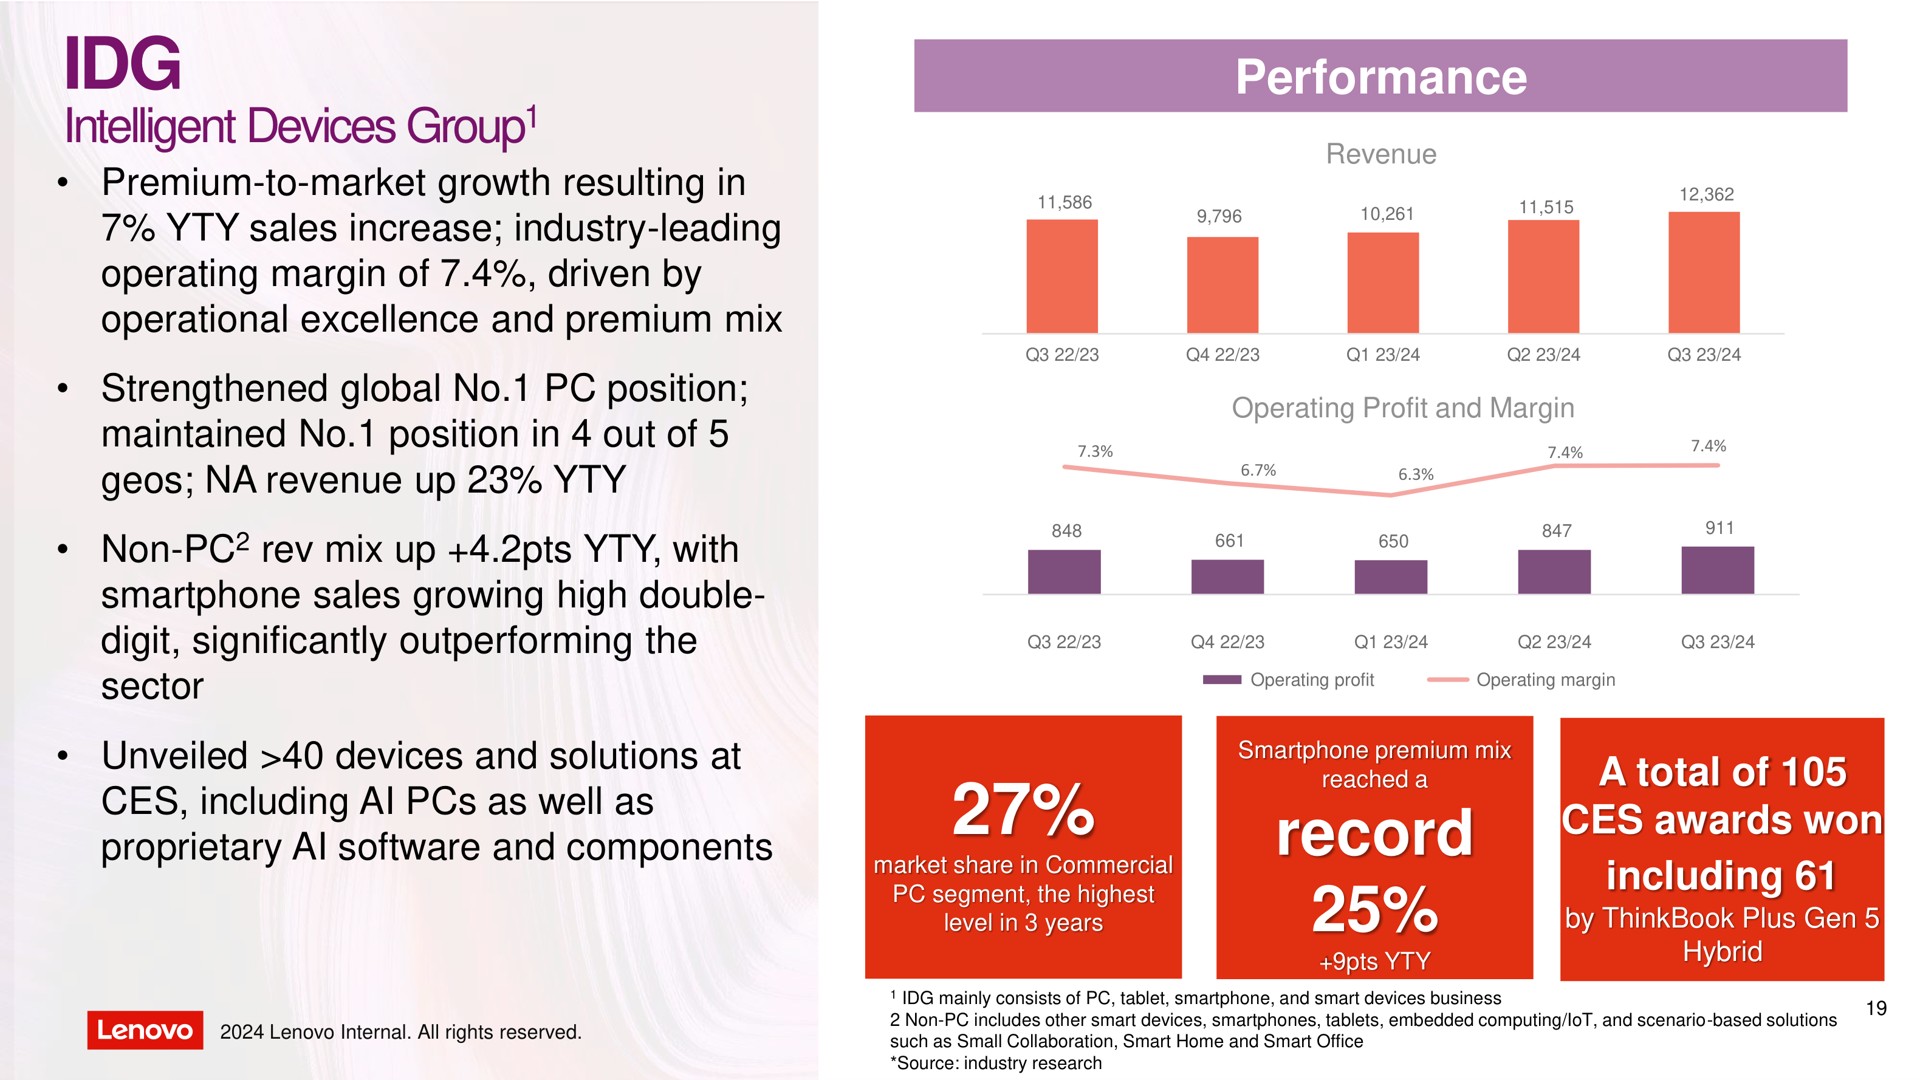 intelligent devices group performance record group by | Lenovo